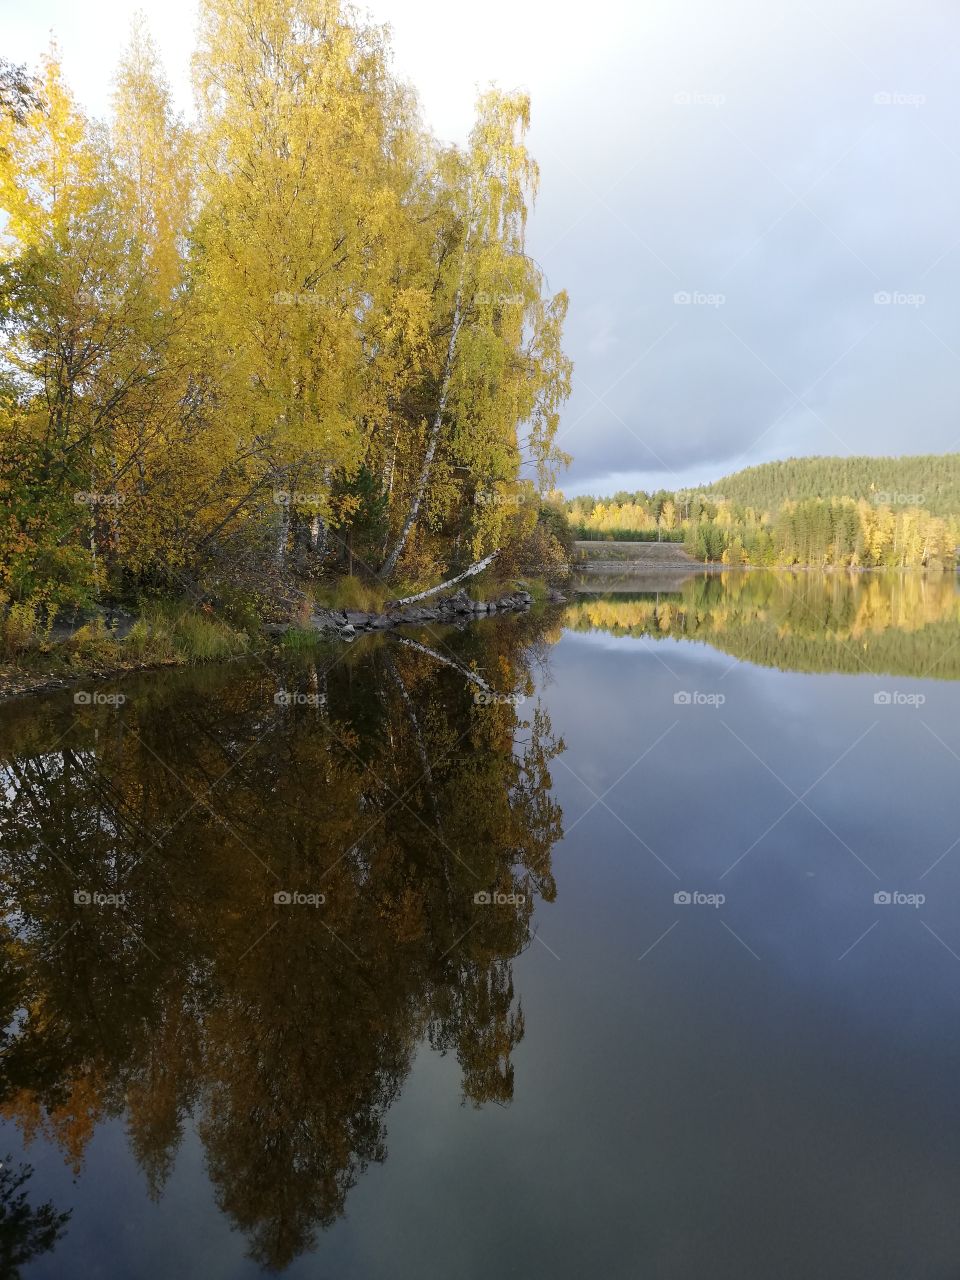 A beautiful multicoloured landscape under the dark grey and white clouds. The blue sky is seen a little and the sun makes reflections of the forest, the bent trees and the railway bridge on the calm lake.